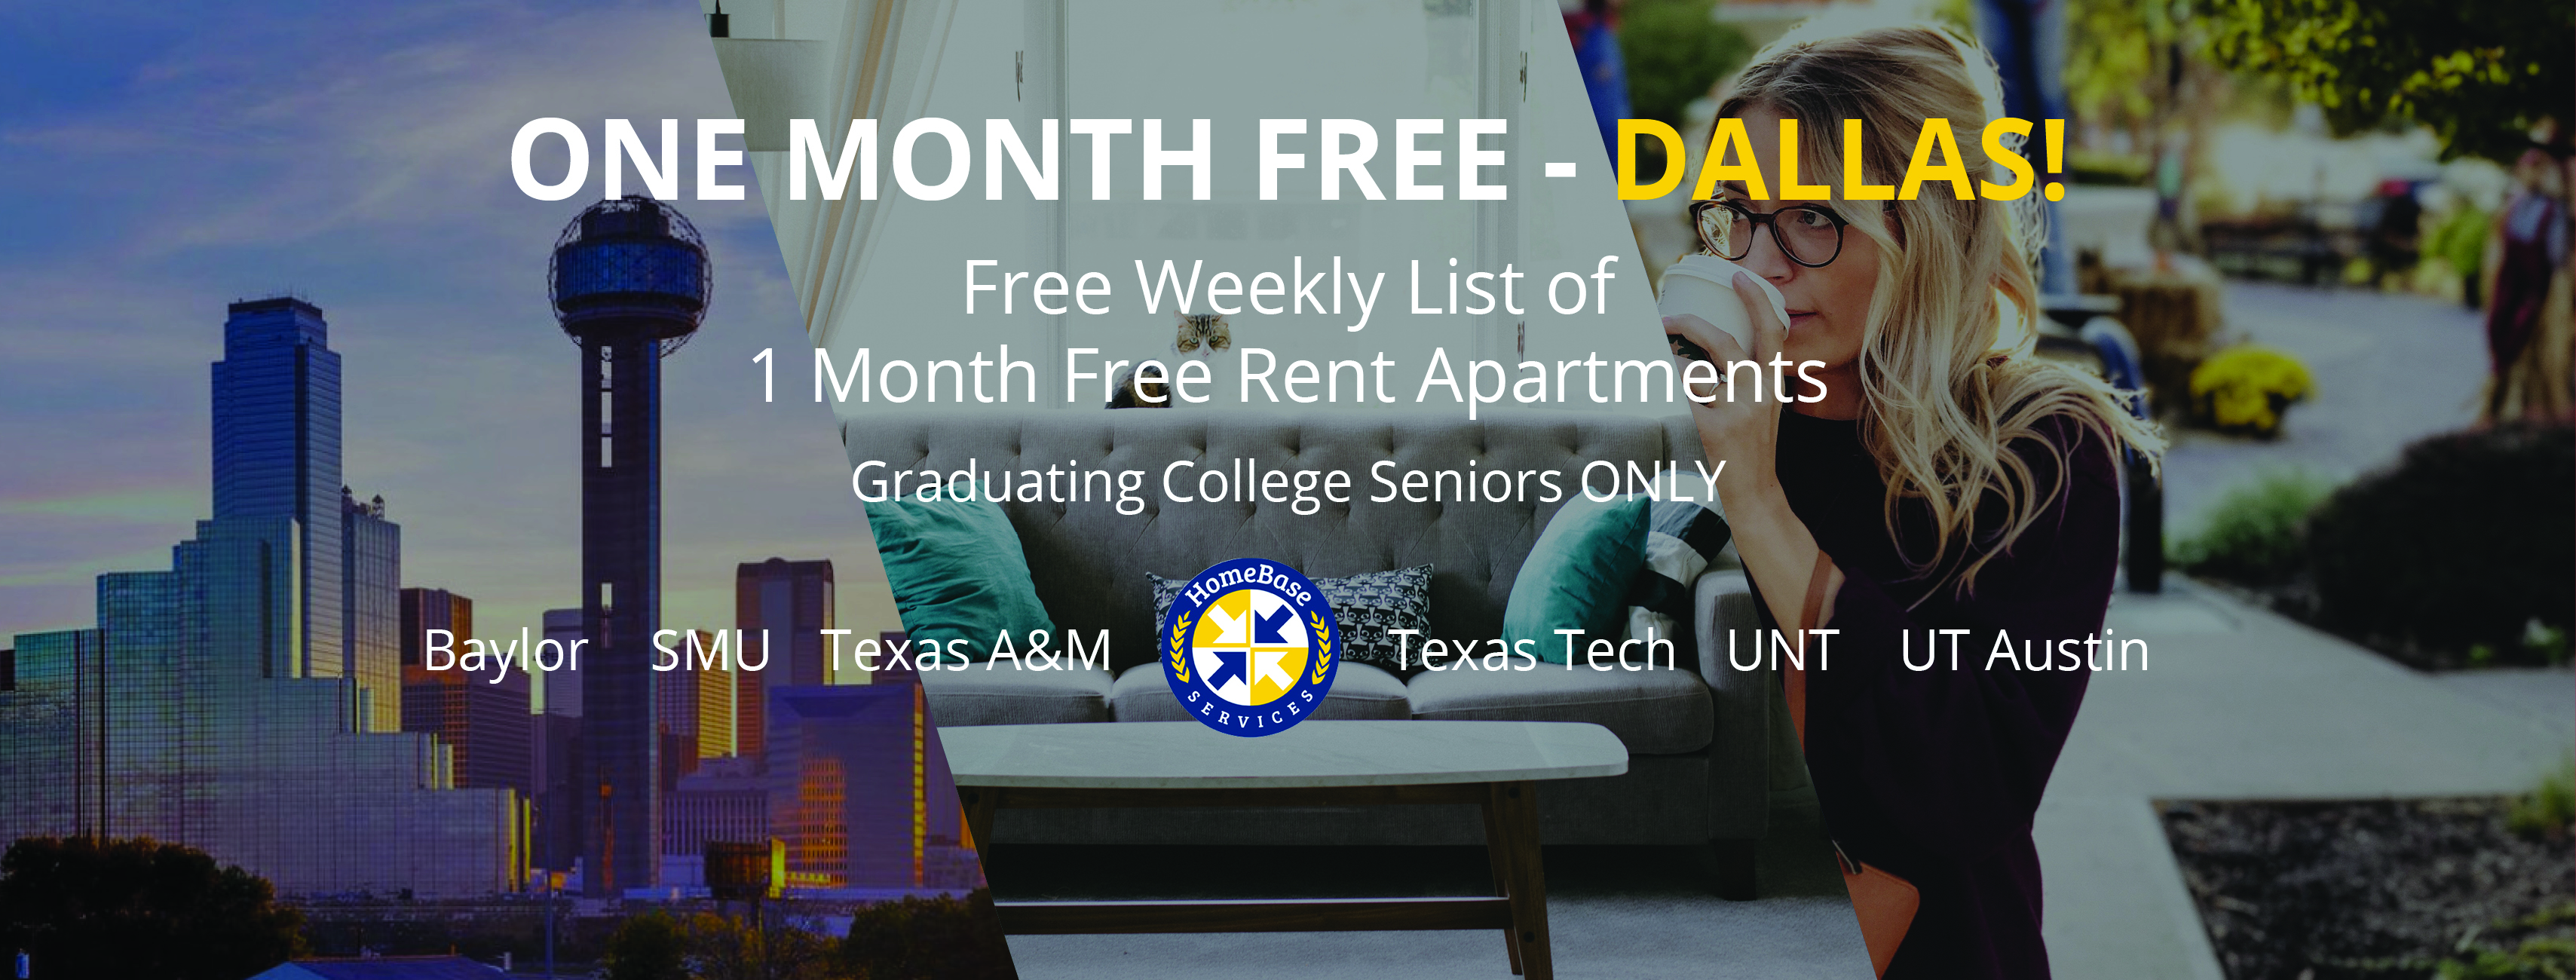 Weekly Free Rent Apartment Specials in Dallas & Houston